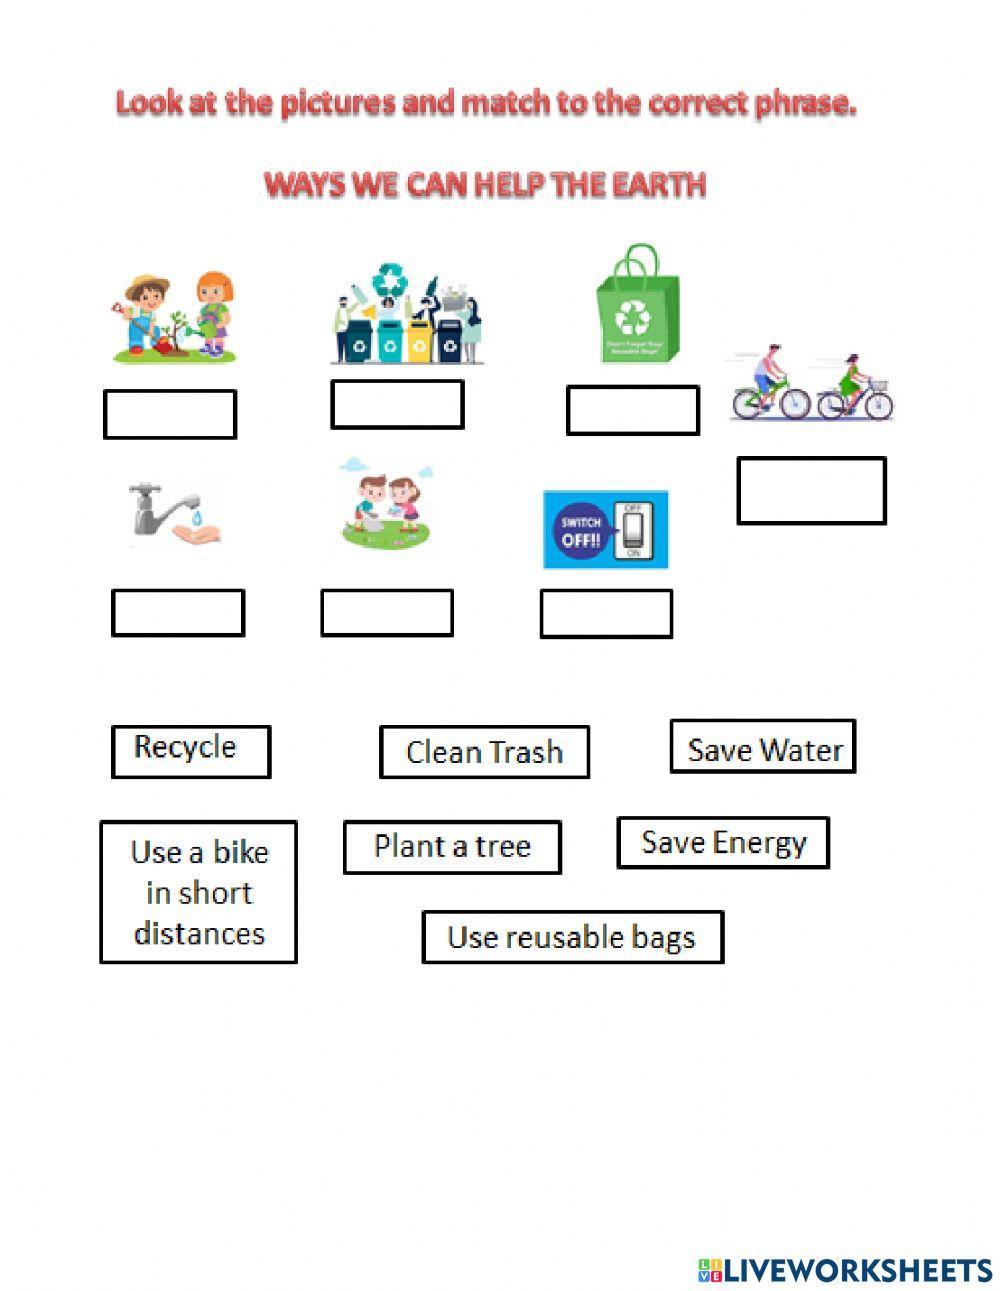 Ways to help the earth